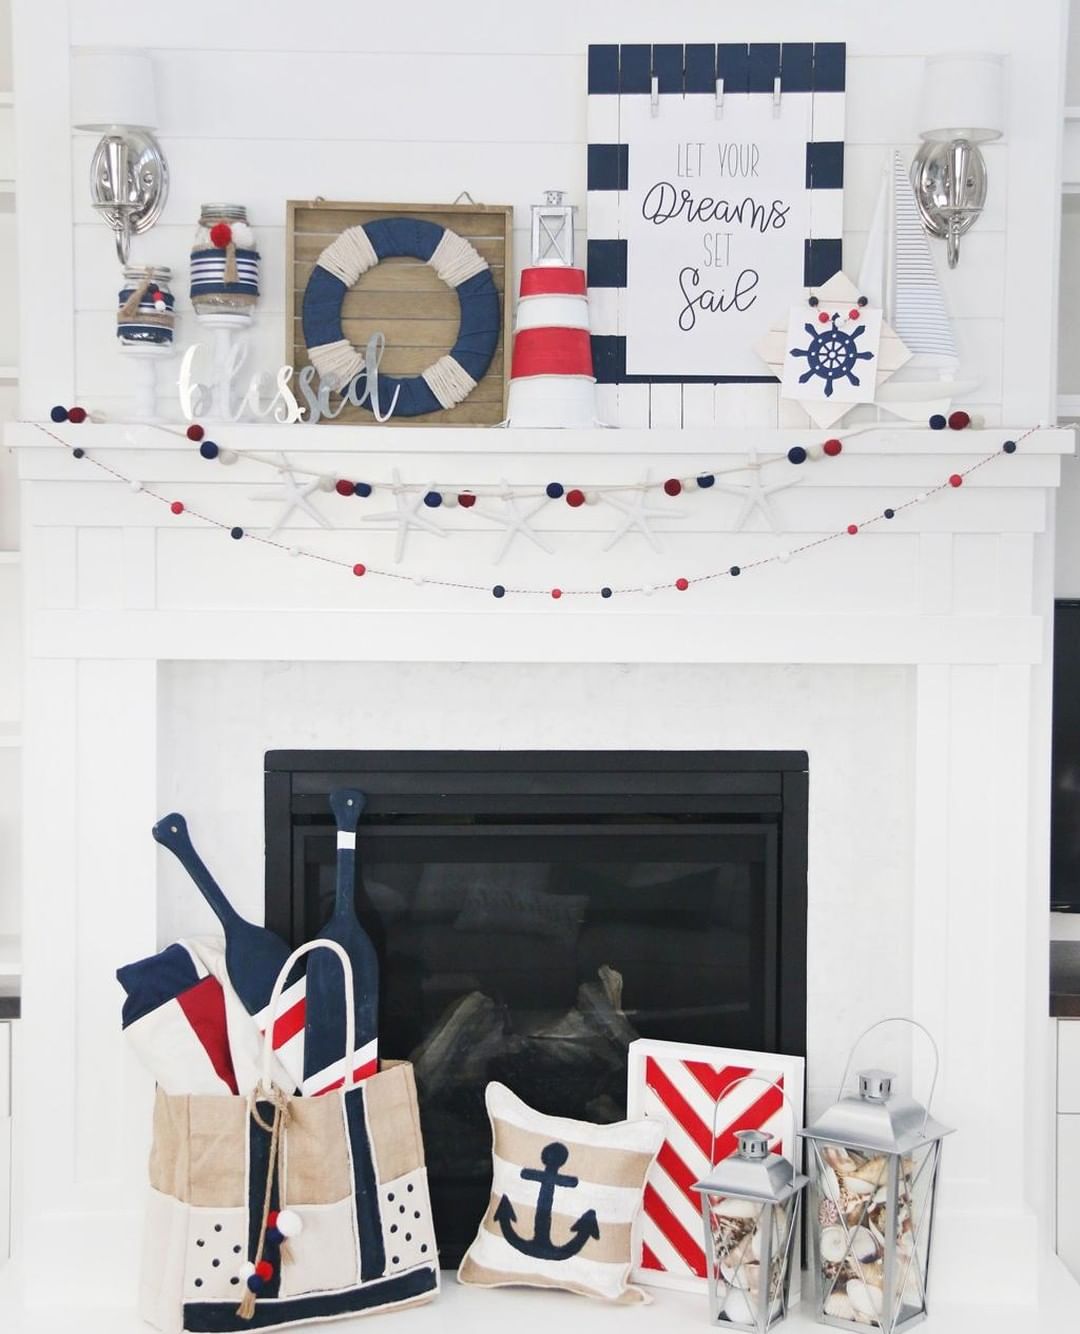 Nautical Theme for a Playful Summer Mantel